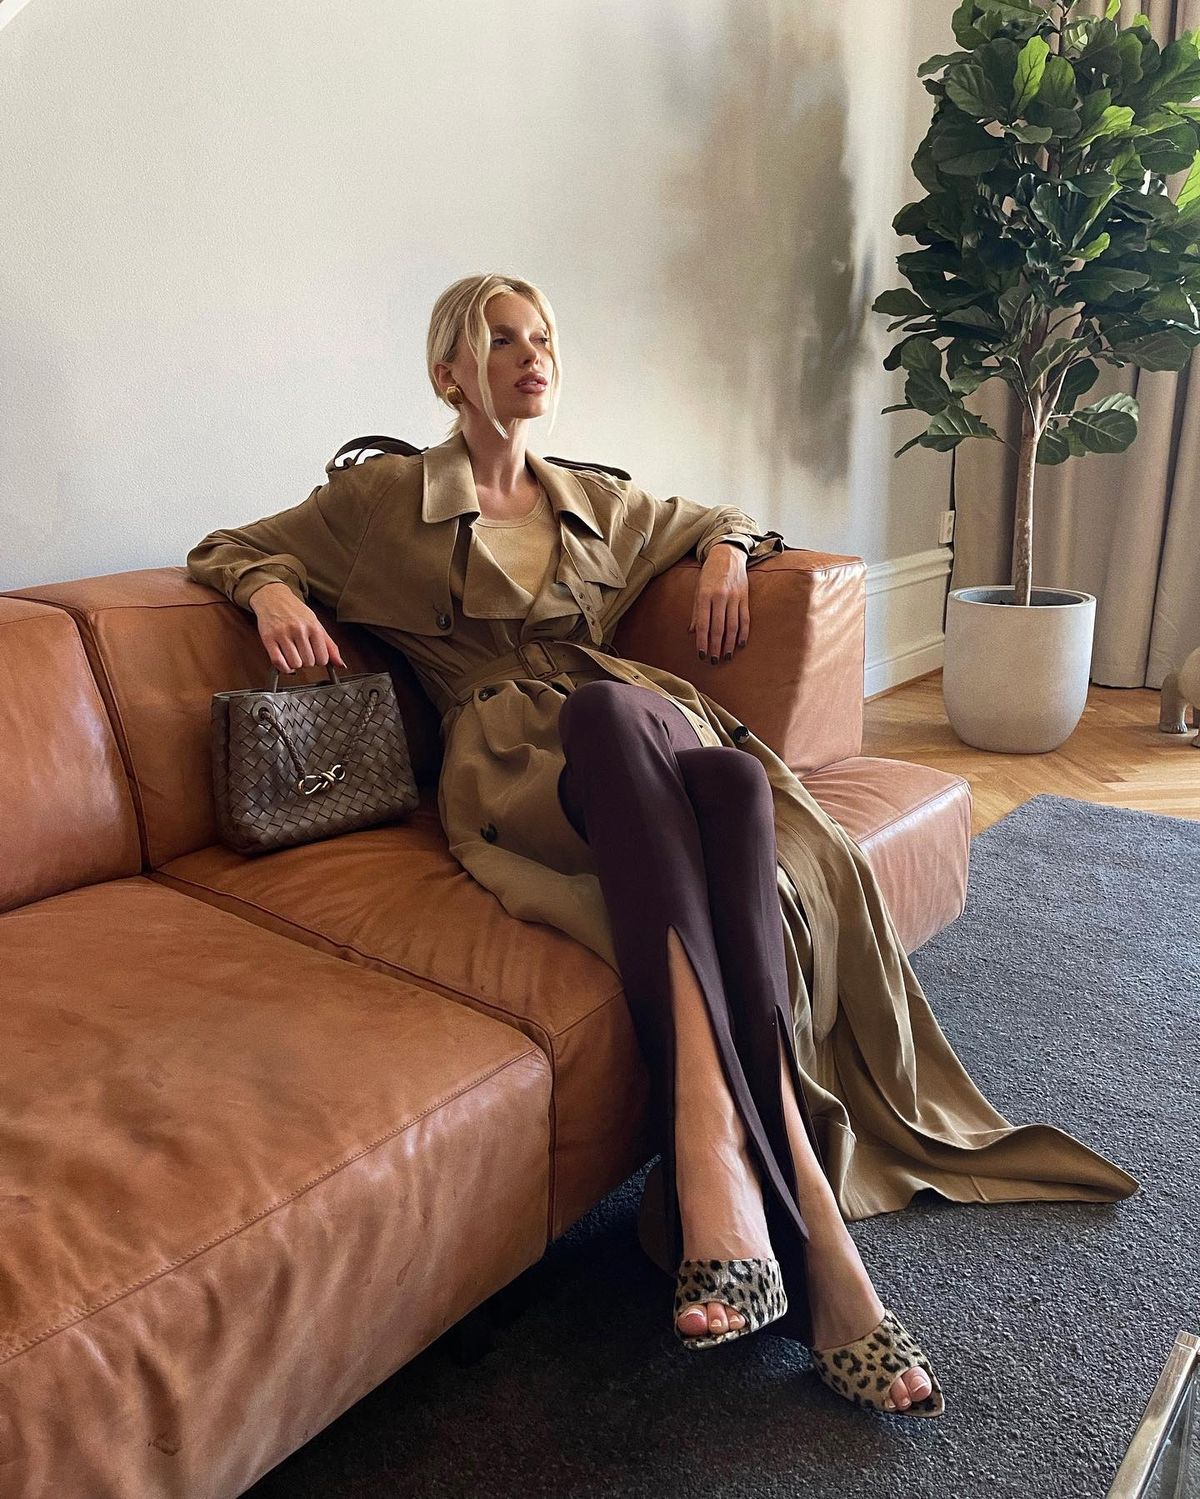 Elsa Hosk wears double-breasted trench coat by Saint Laurent, clip-on vintage earrings by Saint Laurent, and stretchy brown The Attico trousers.